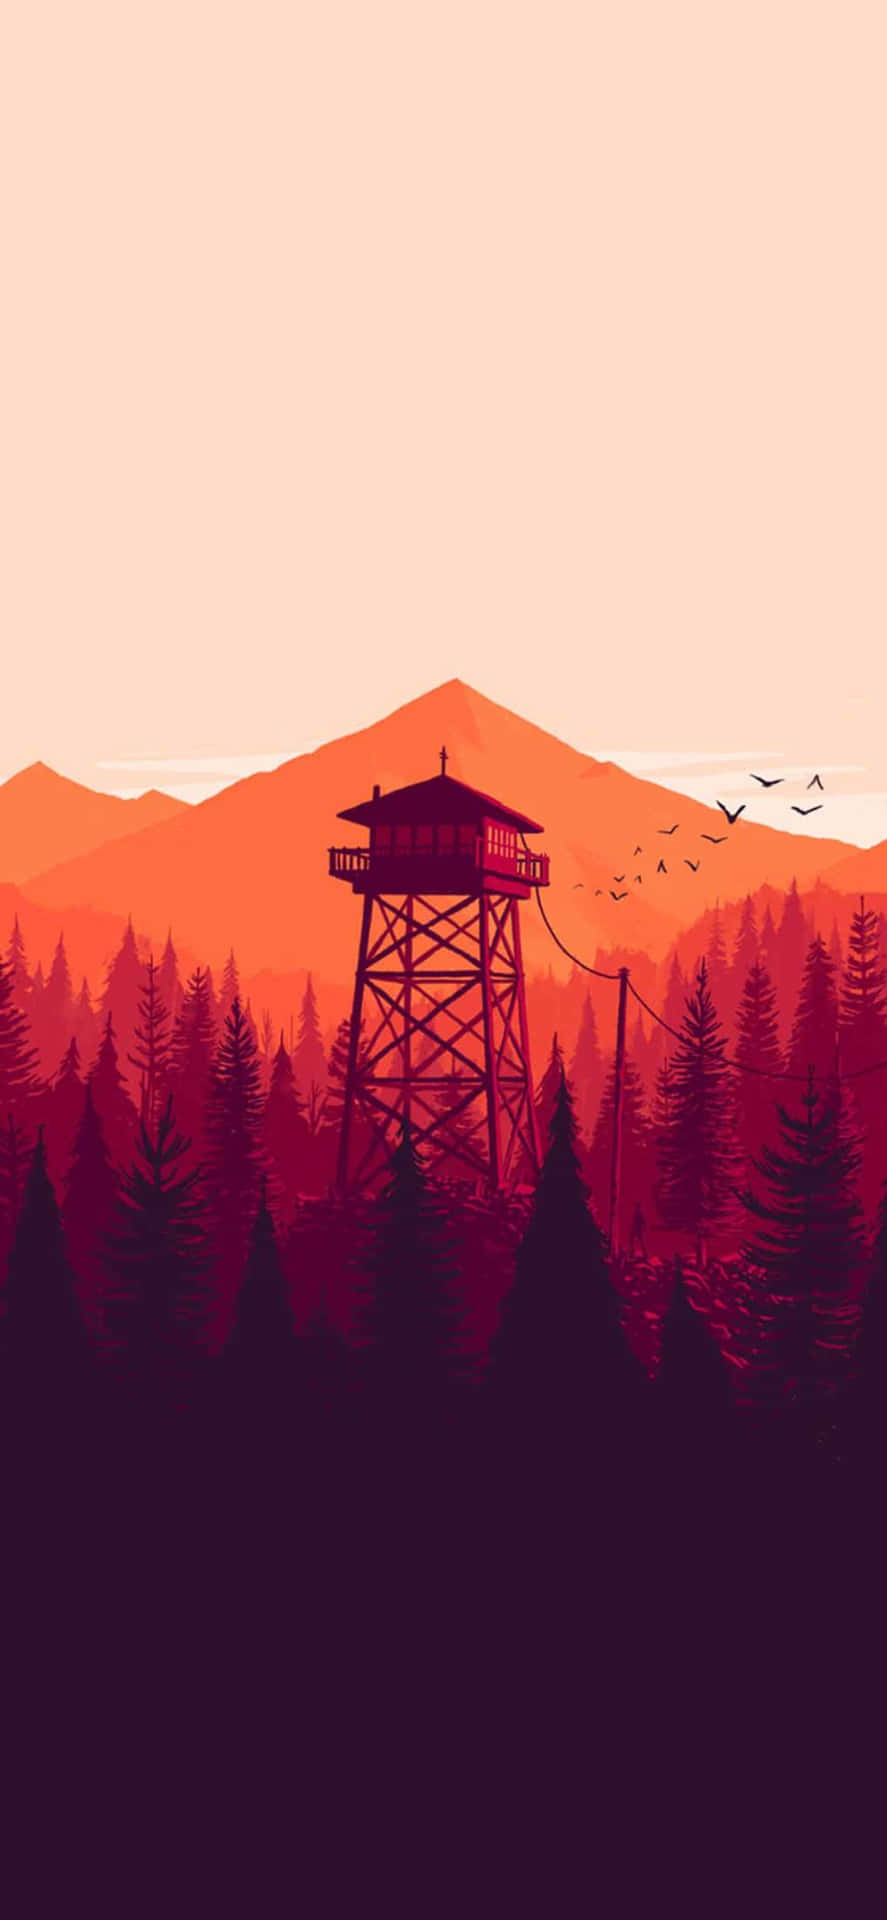 A Silhouette Of A Tower In The Forest